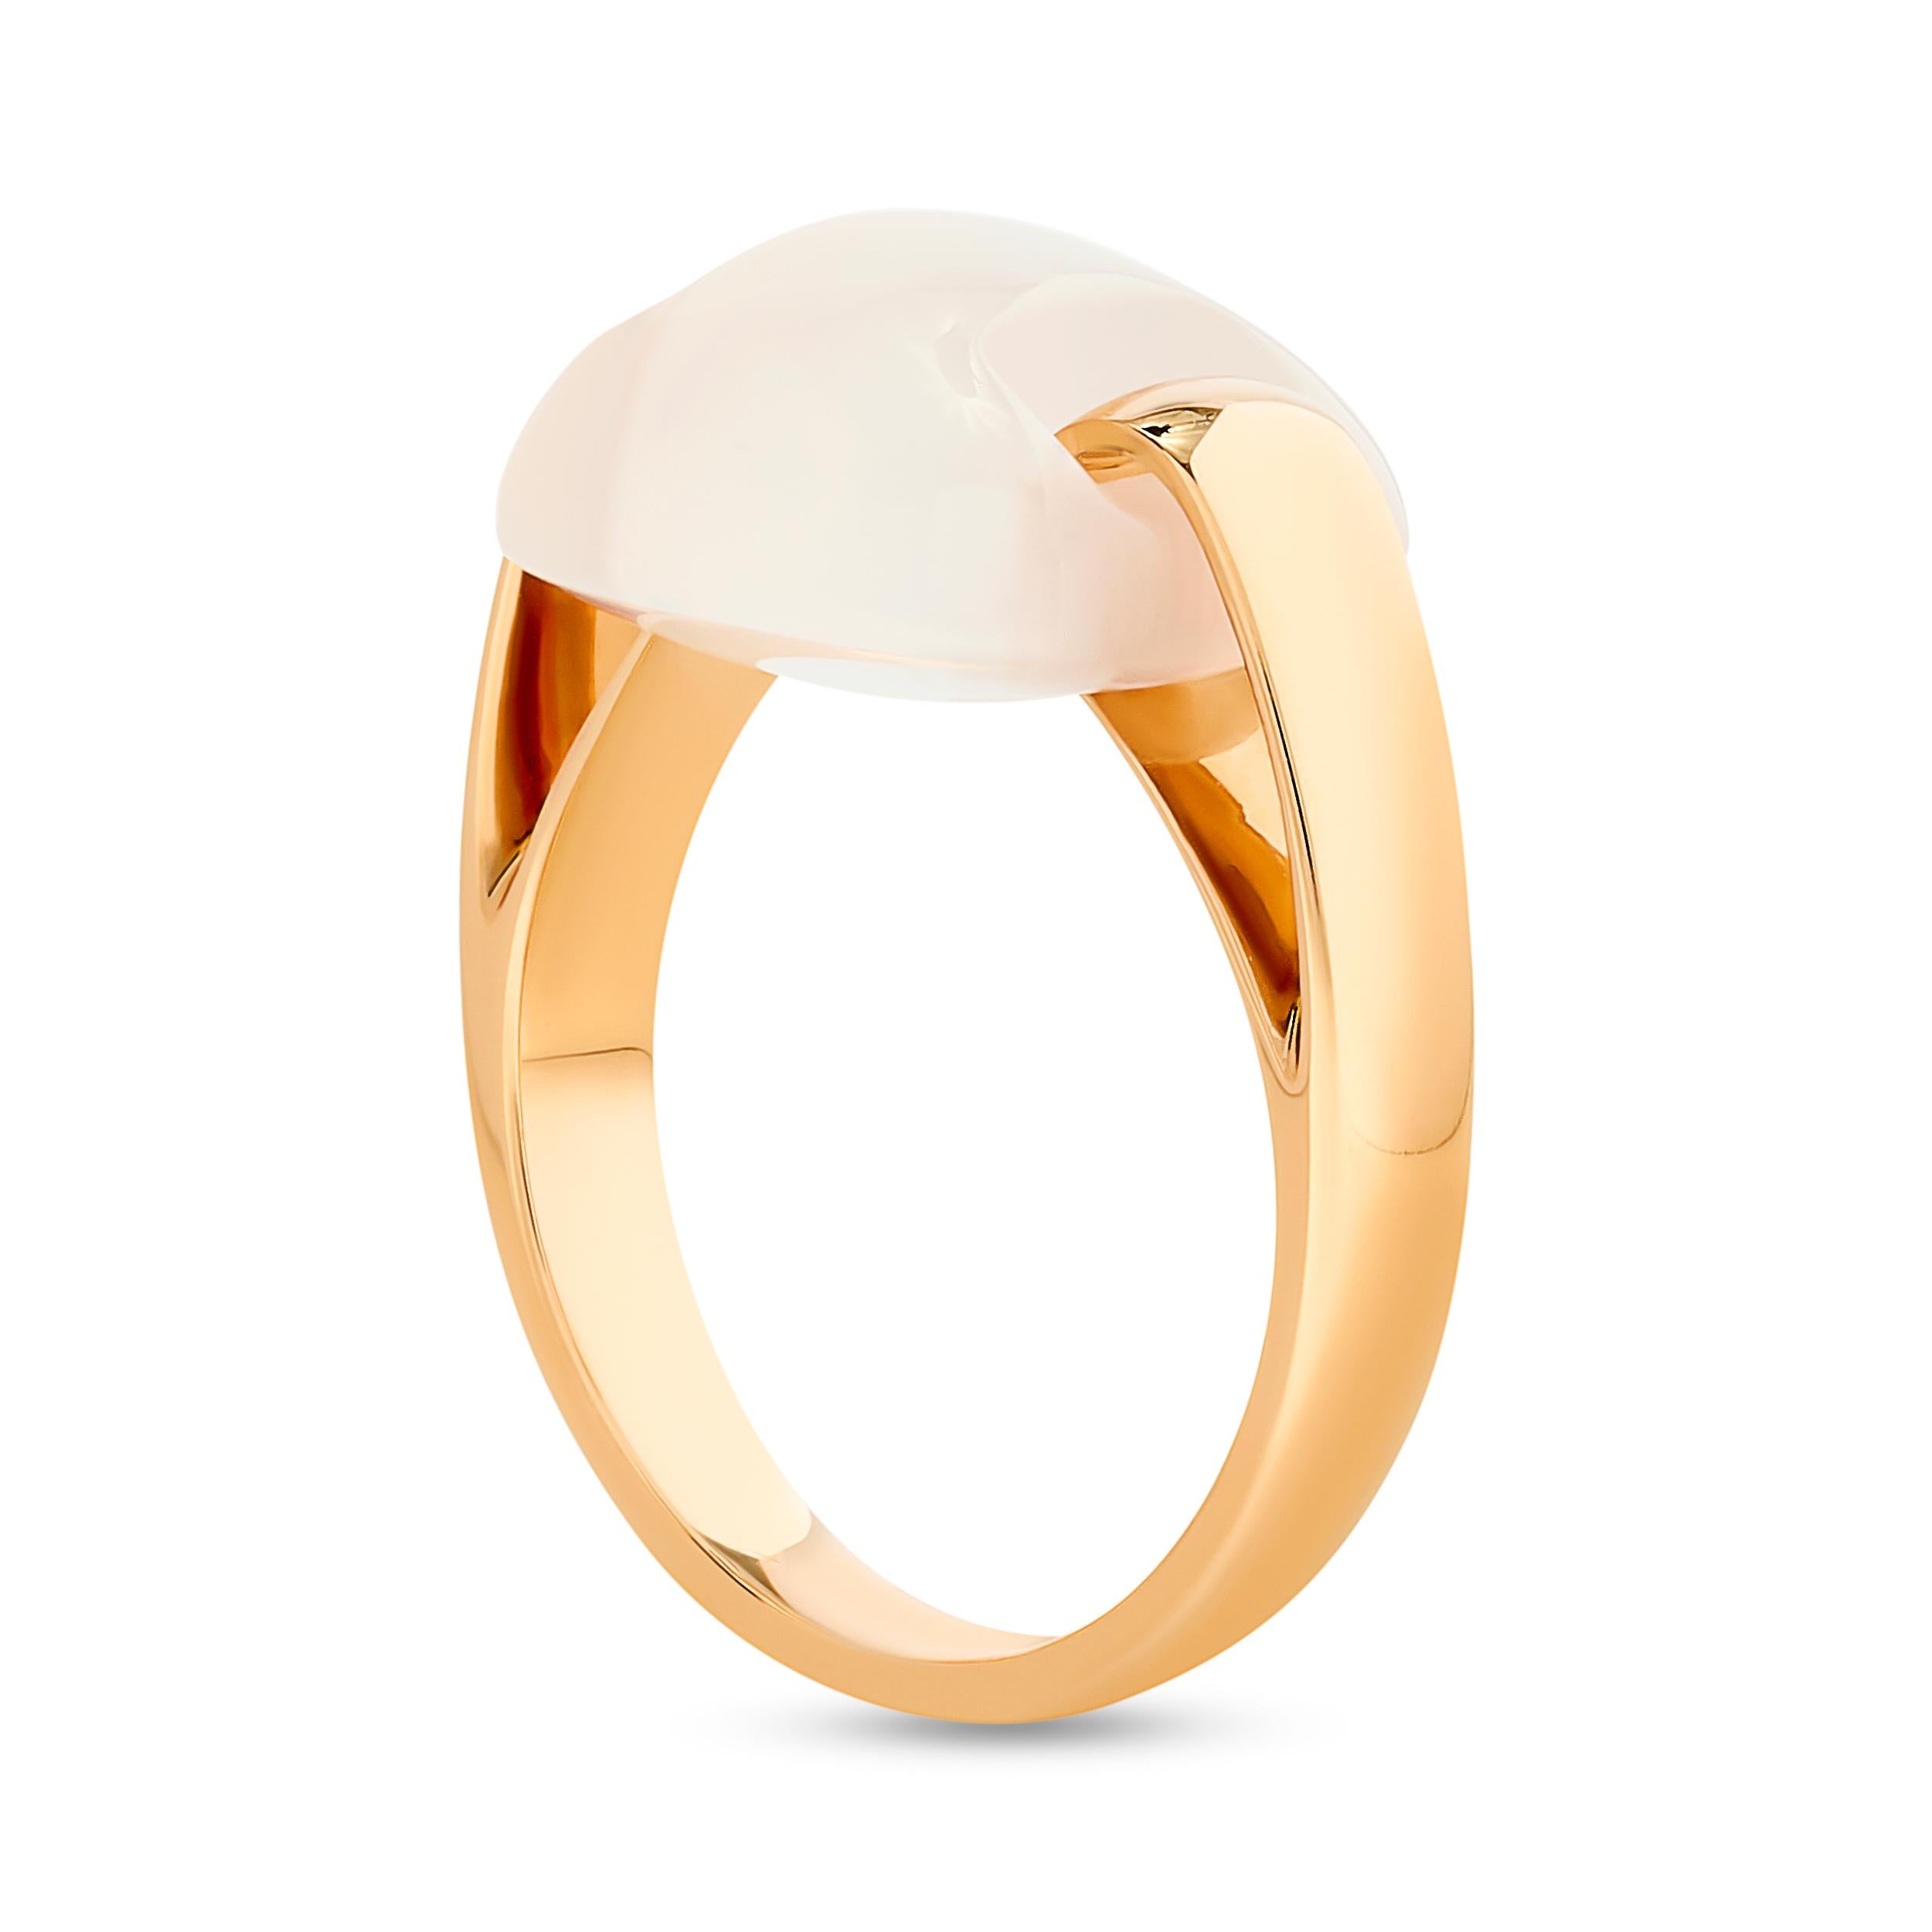 Crafted from luxurious 18k gold, the band is sleek and polished, showcasing Ferragamo's signature craftsmanship. 
The band interlocks with a clear quartz gemstone.

Ring size US 5.50
Signed with the Ferragamo and 18k stamps.
Ferragamo retail: $2,150